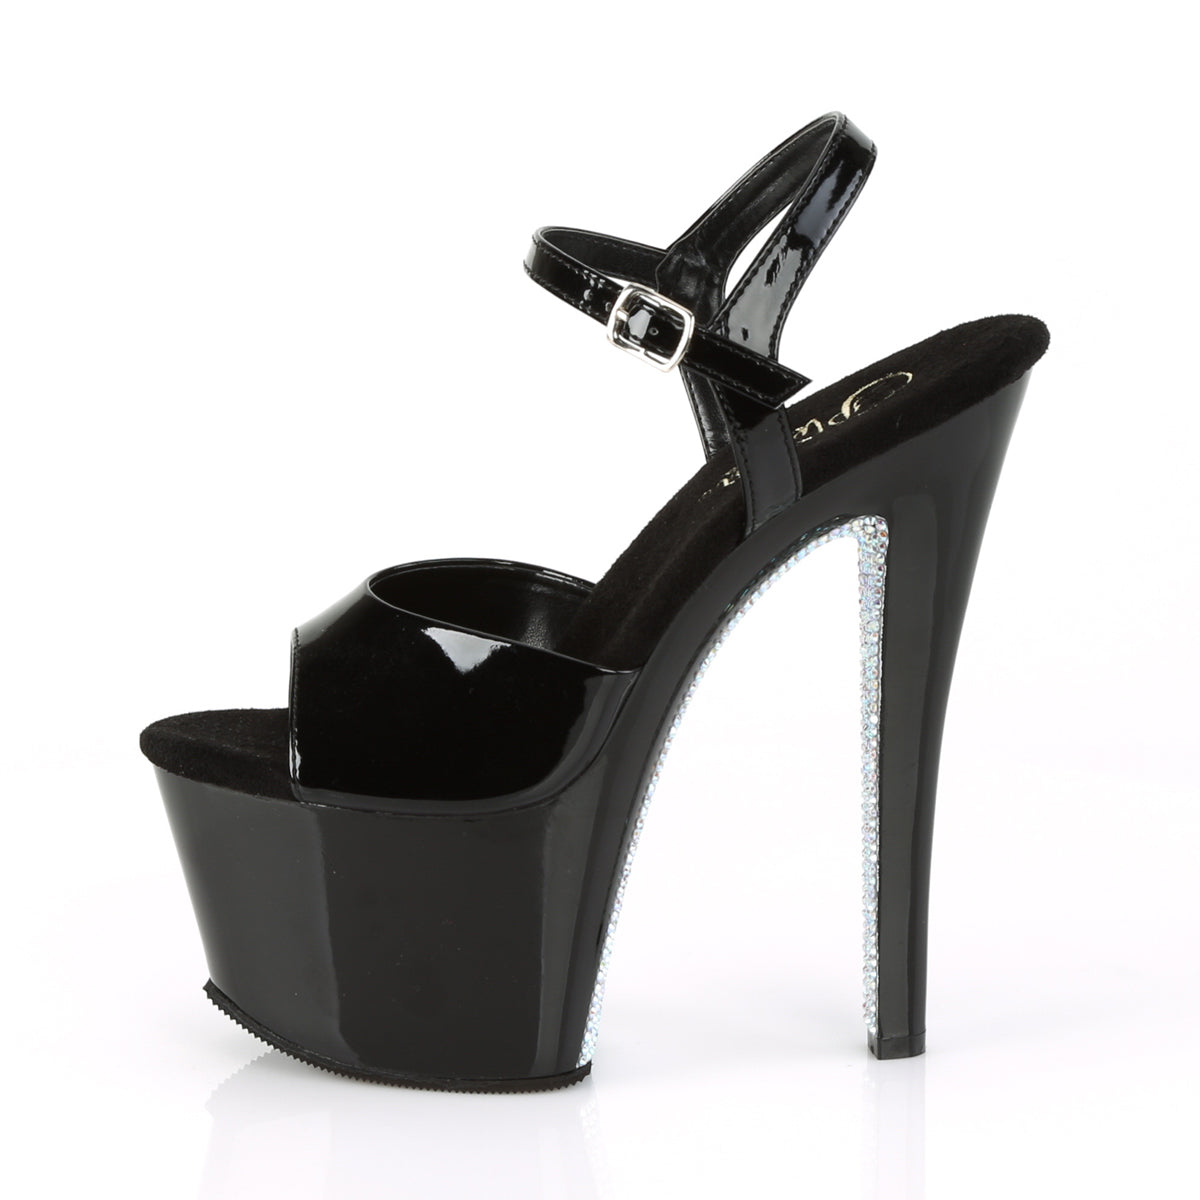 SKY-309CRS 7" Heel Black and Silver Pole Dancing Platforms-Pleaser- Sexy Shoes Pole Dance Heels